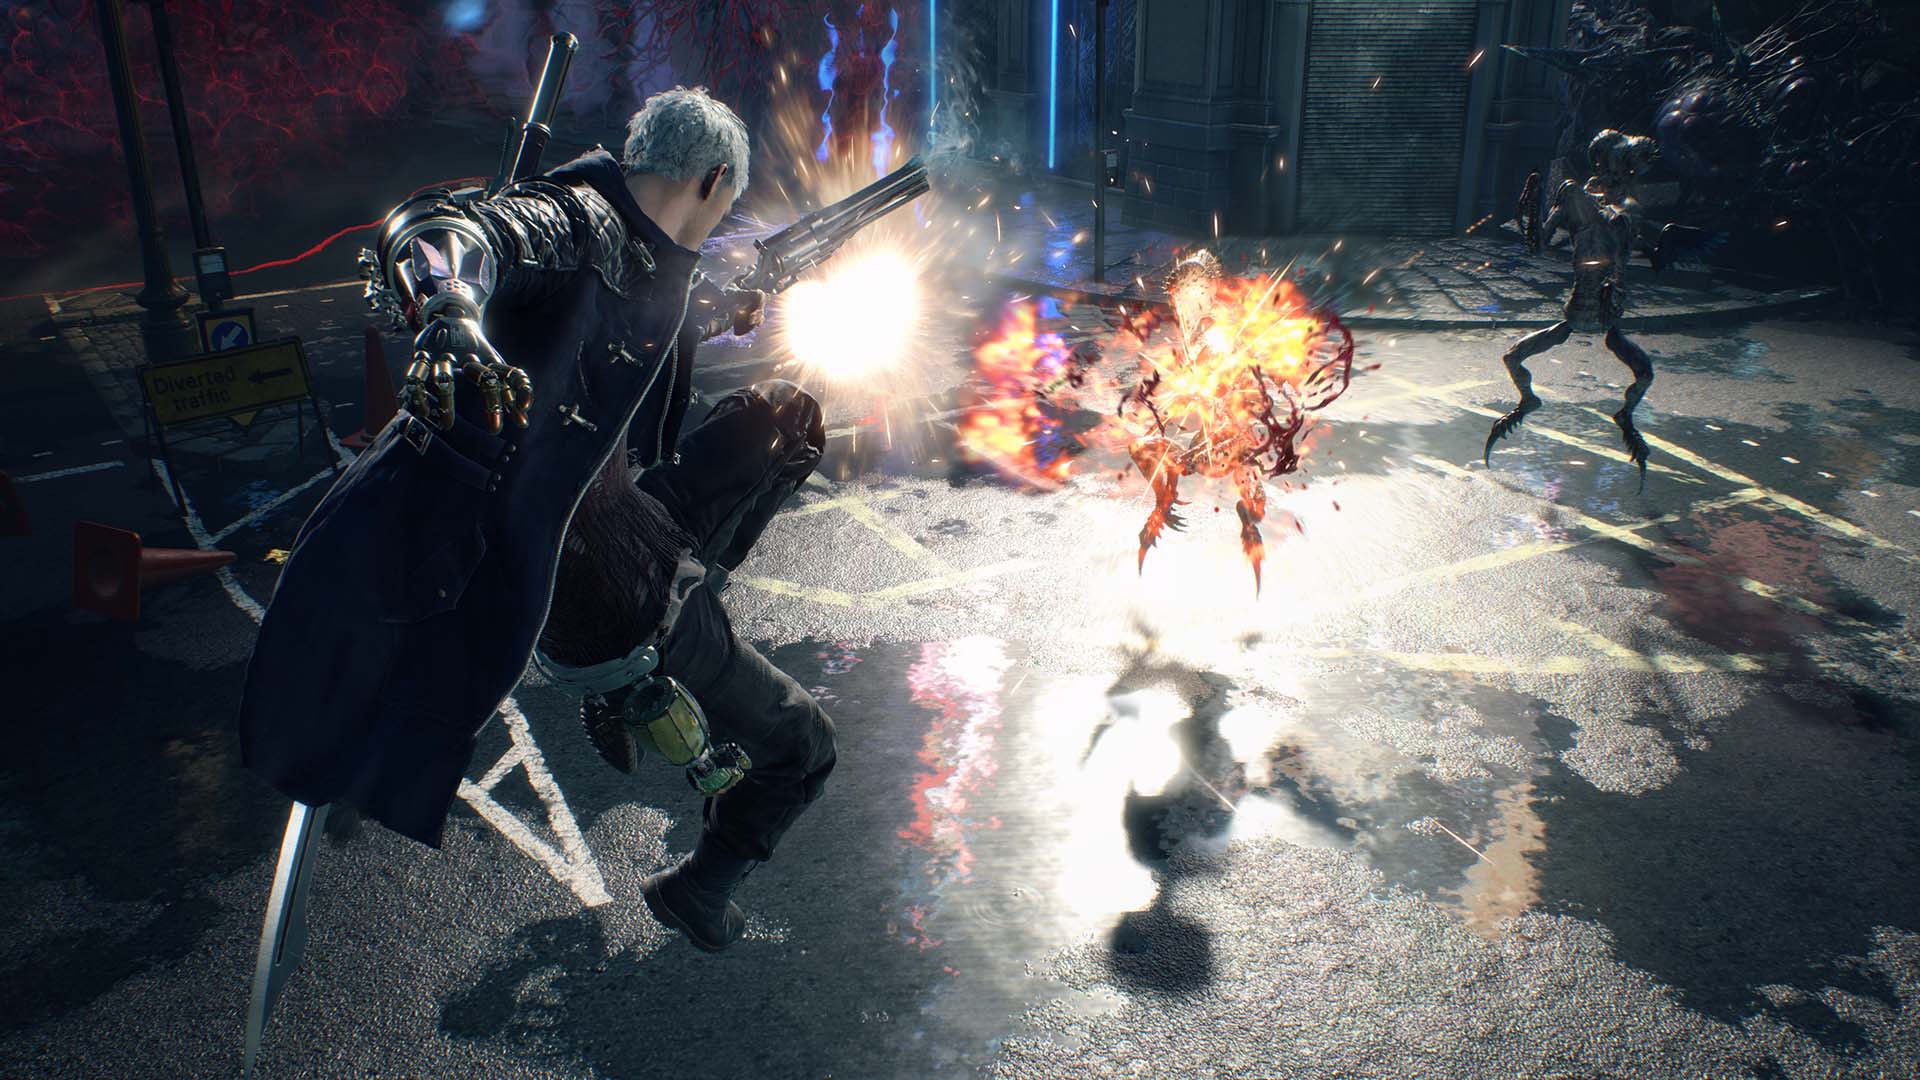 Character Spotlight: The Cast of Devil May Cry 5 - Anime News Network